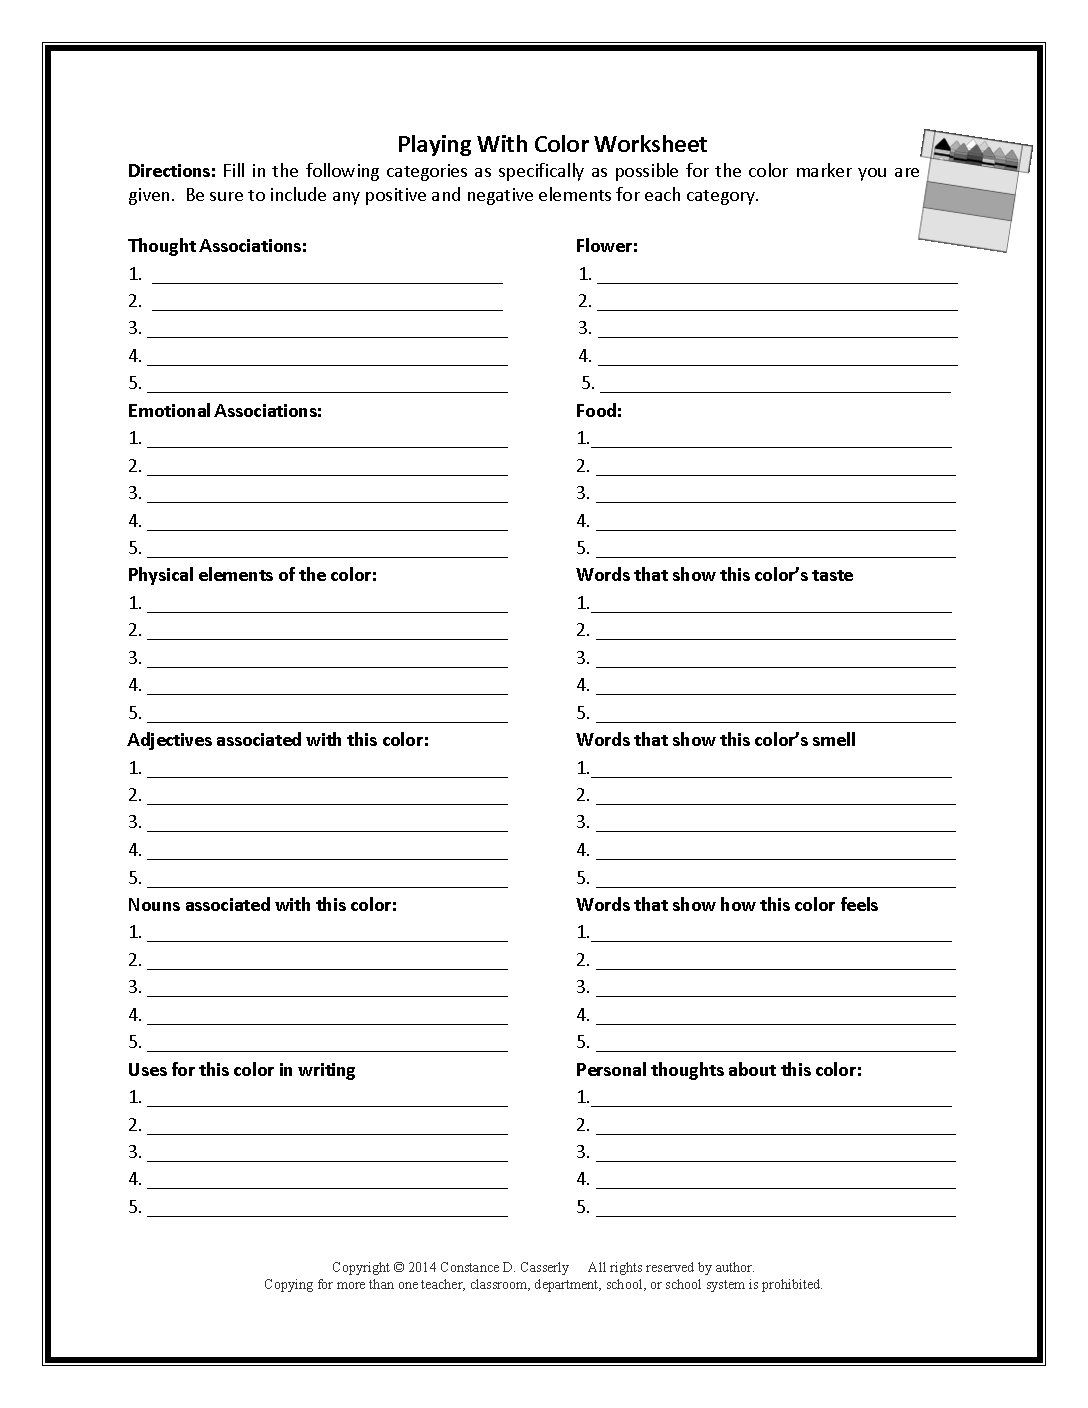 16-best-images-of-9th-grade-reading-worksheets-9th-grade-reading-comprehension-worksheets-9th